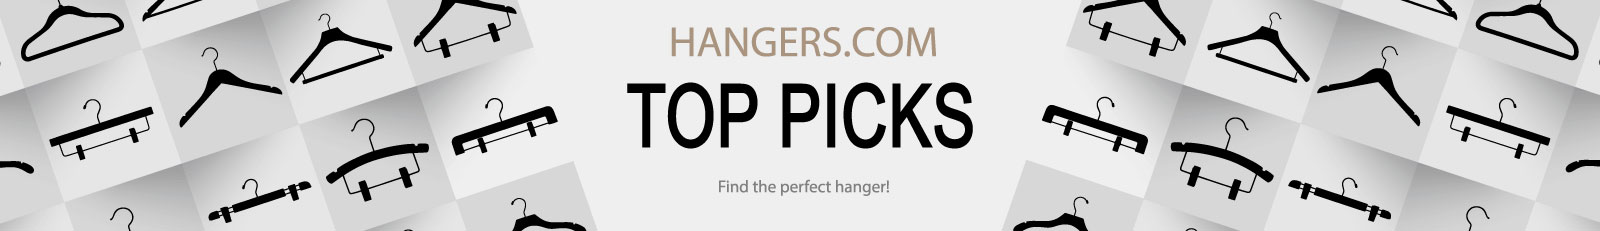 Top Choices for select hanger categories